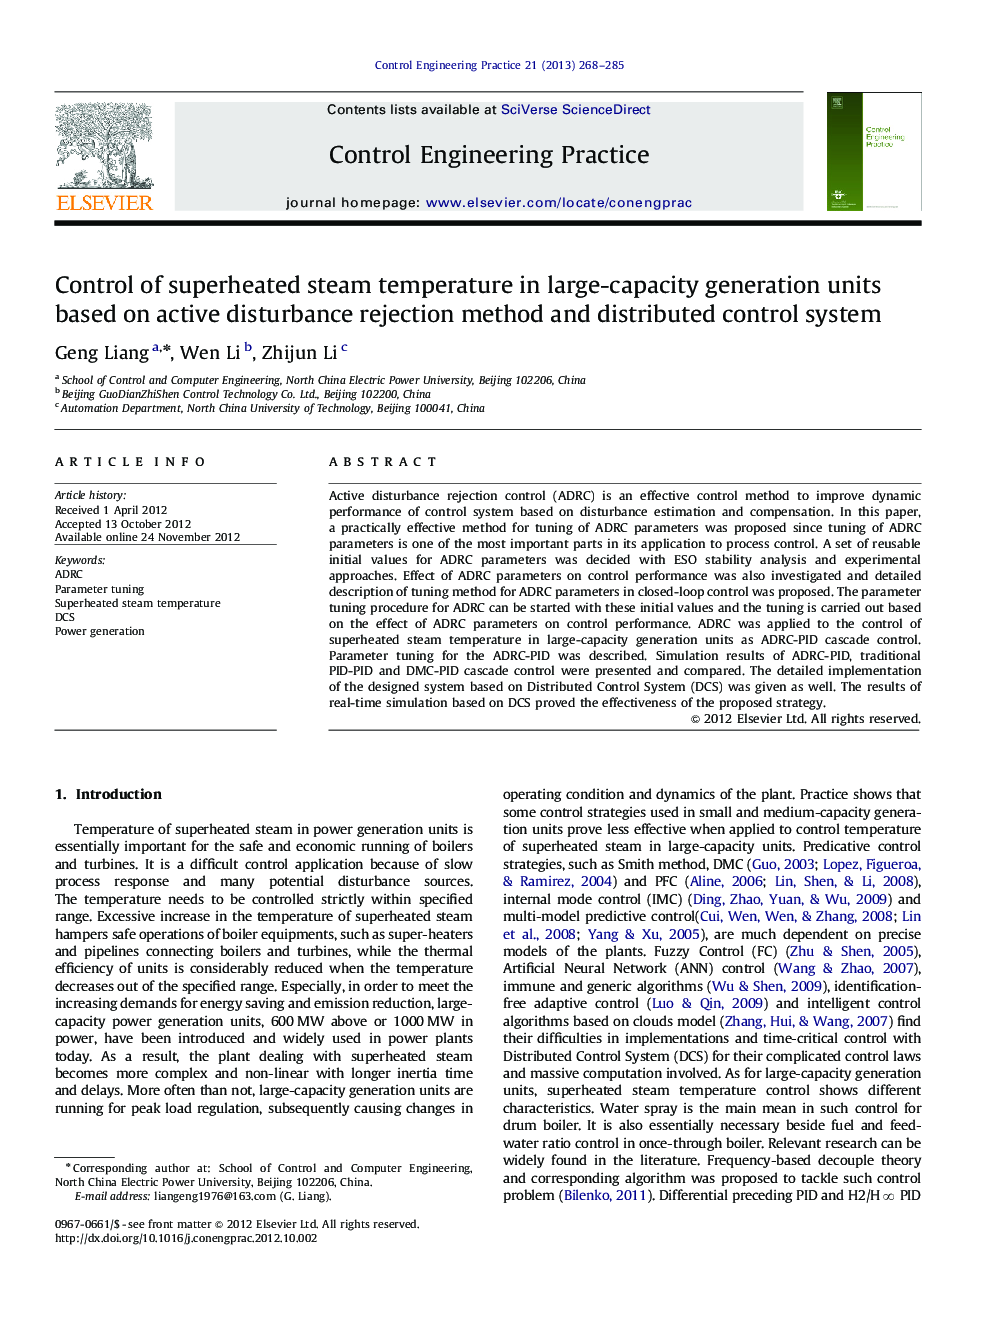 Control of superheated steam temperature in large-capacity generation units based on active disturbance rejection method and distributed control system